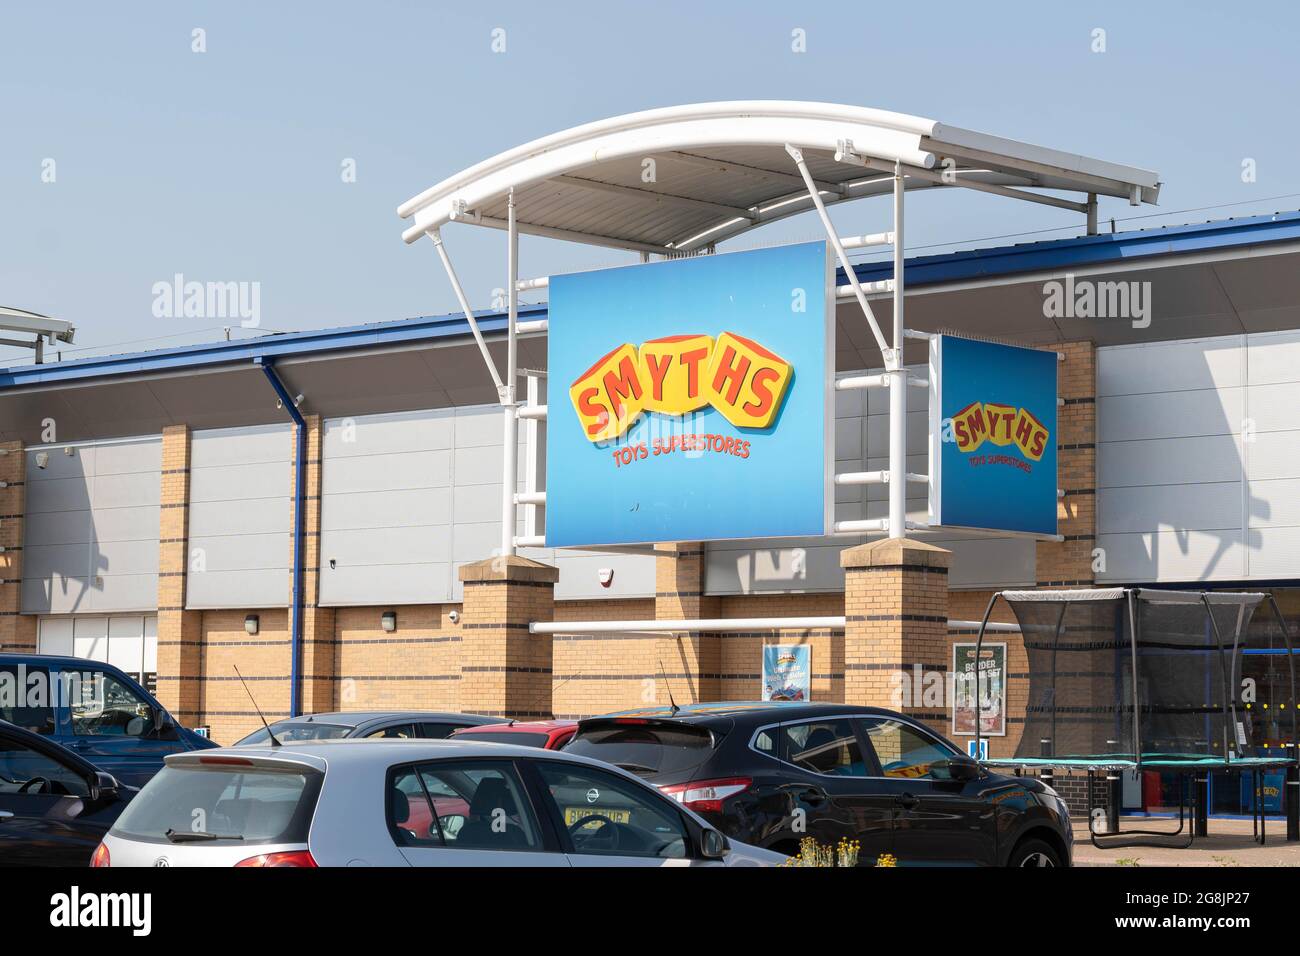 Smyths Toy Superstore entrance Longwater retail park Norwich Norfolk Stock Photo